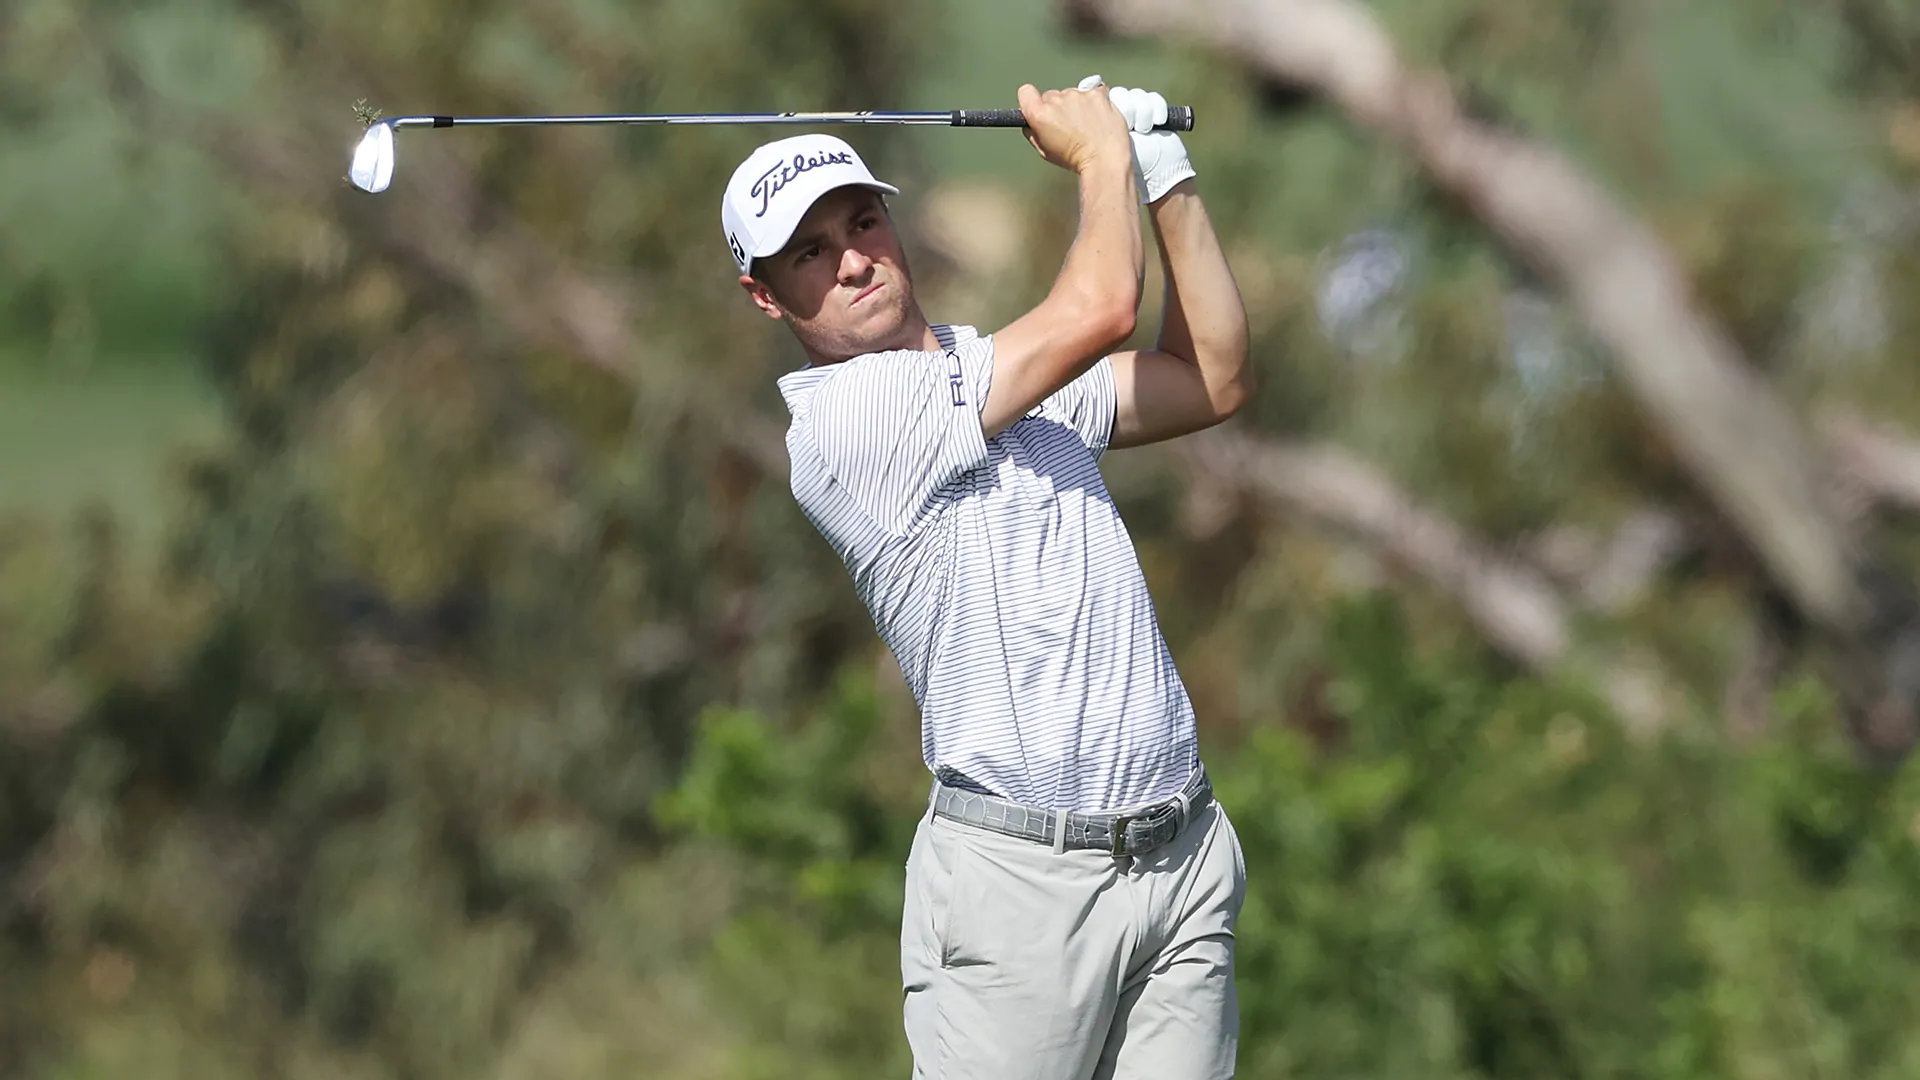 Justin Thomas after using homophobic slur: ‘I deeply apologize … I’ll be better’